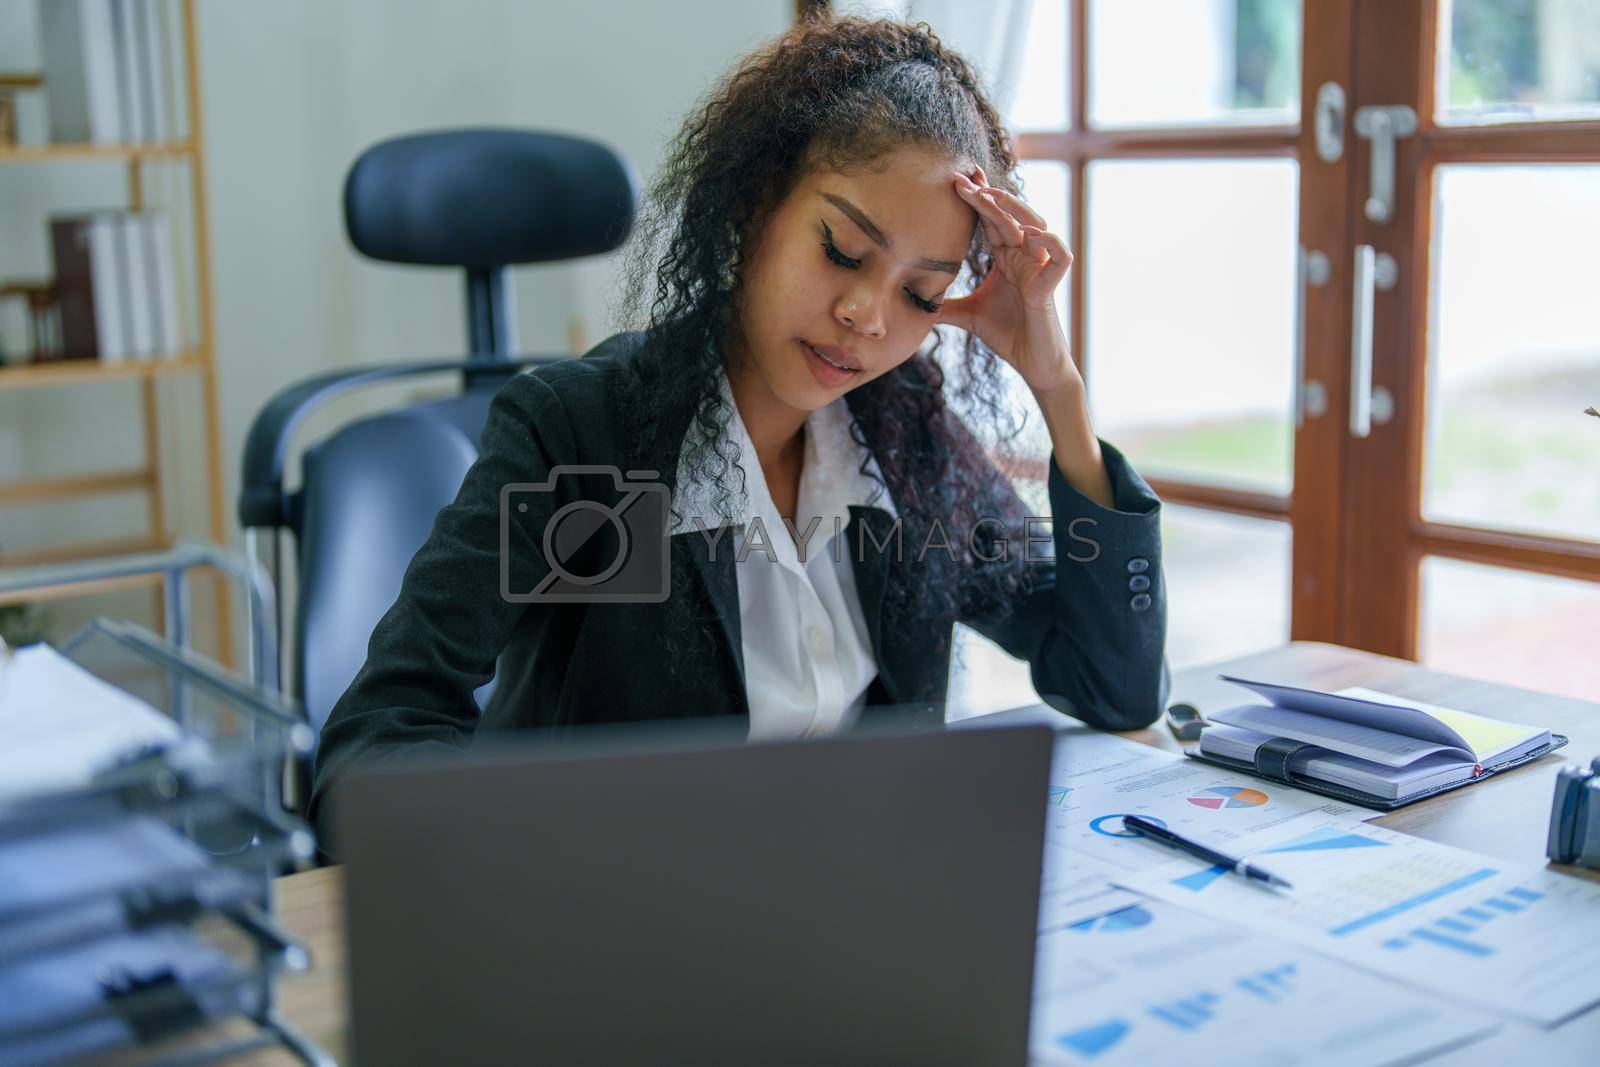 Royalty free image of African Americans women entrepreneurs showing fear and anxiety by Manastrong